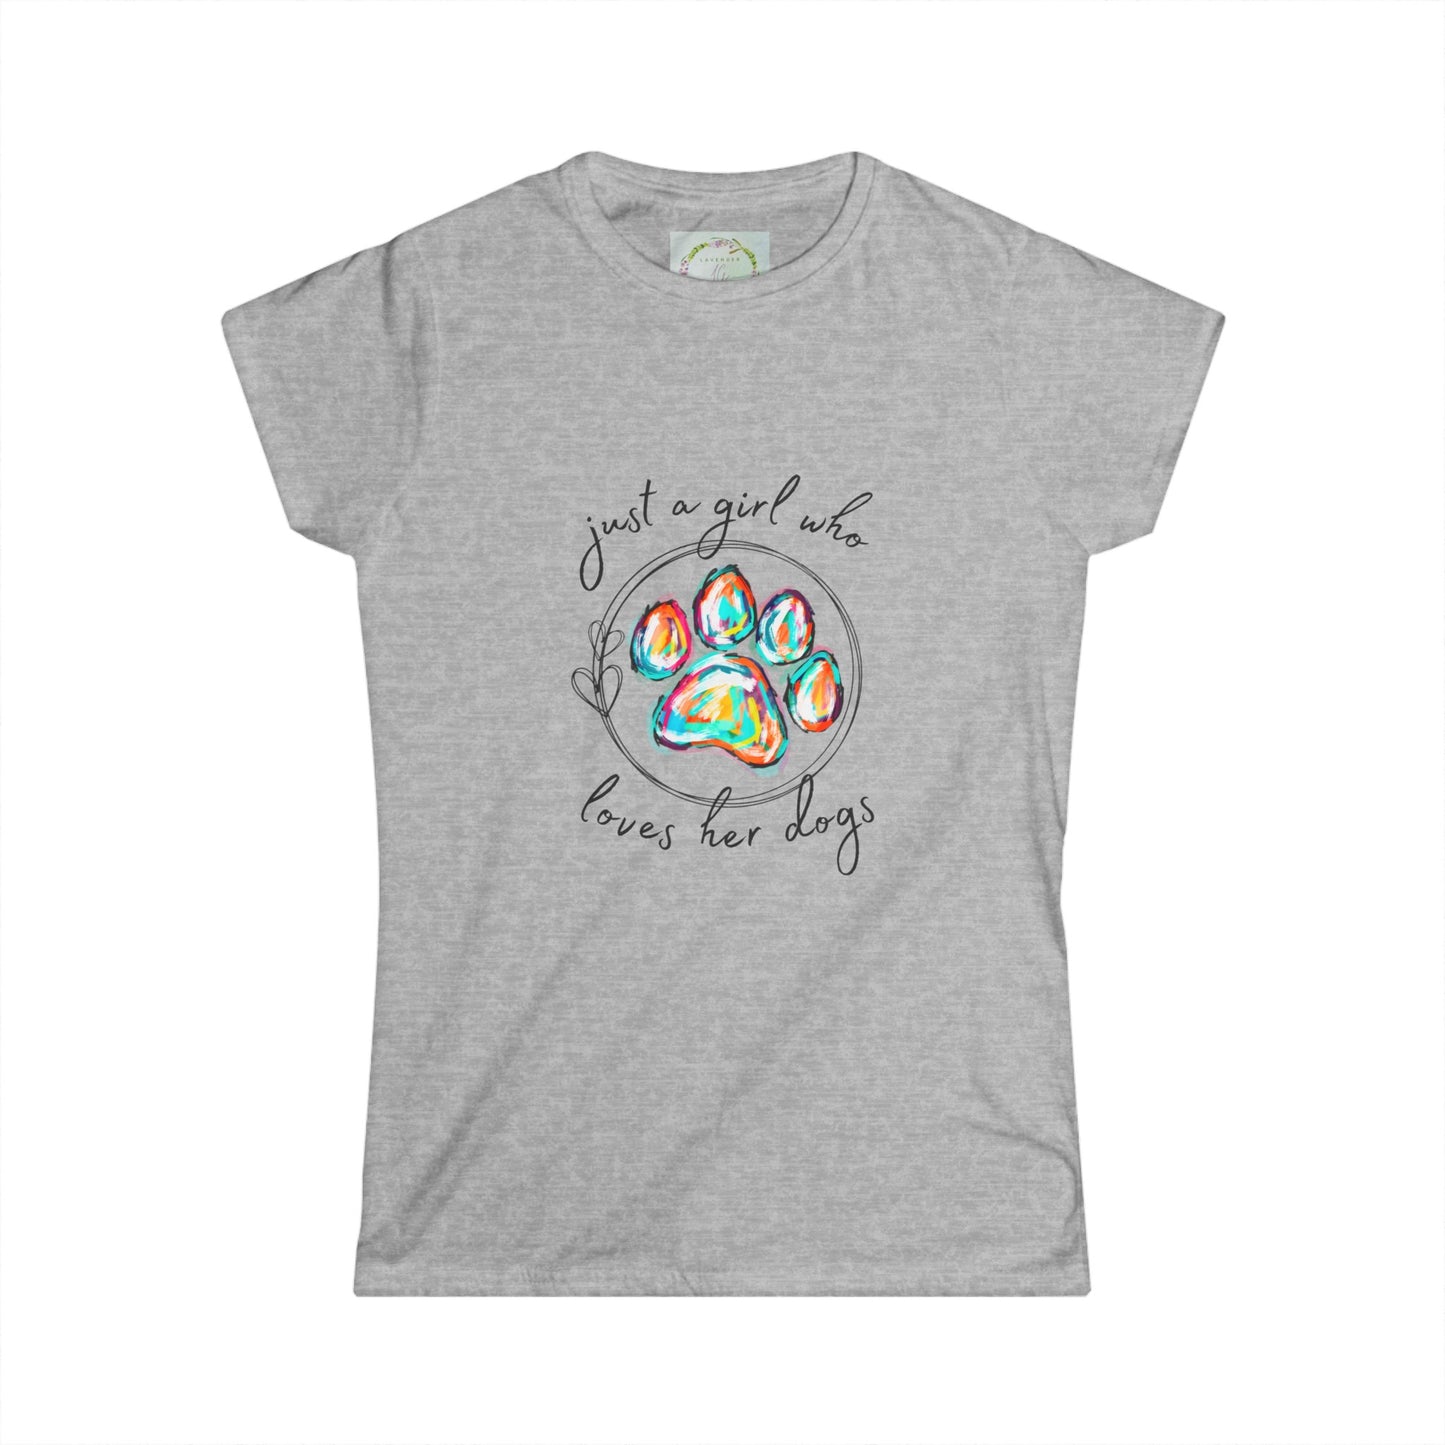 Just A Girl Who Loves Her Dogs -Tee Shirt